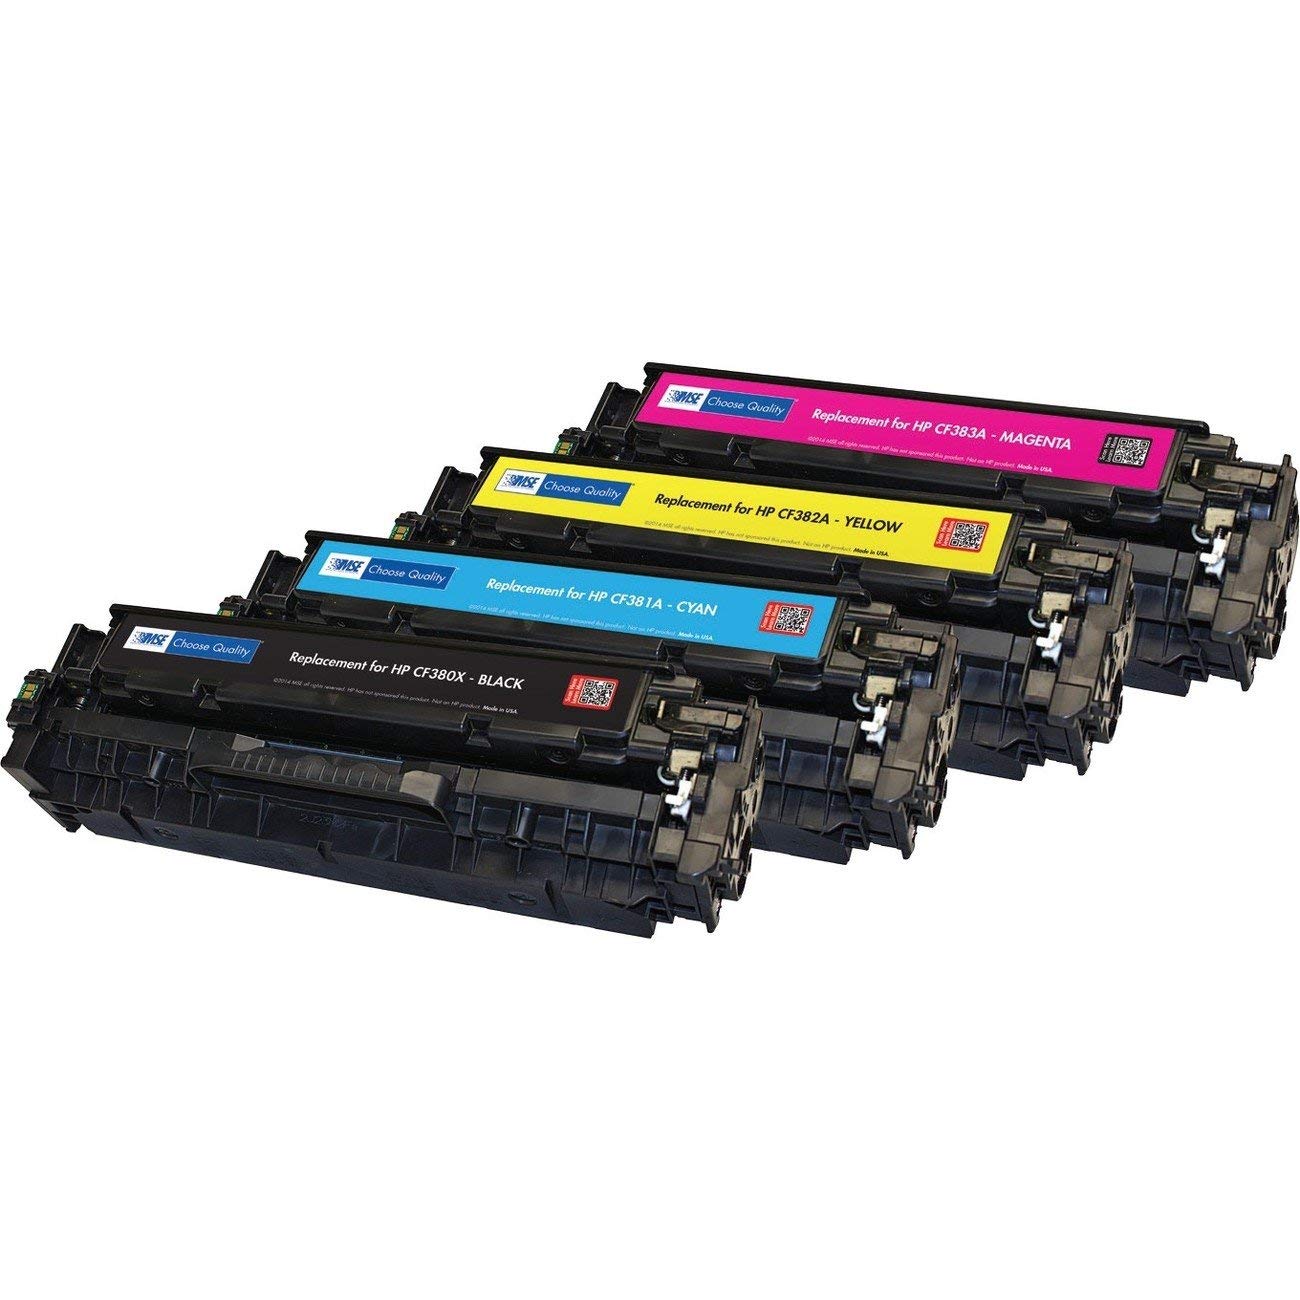 MSE 022138214 REMANUFACTURED TONER CARTRIDGE FOR HP 312A YELLOW